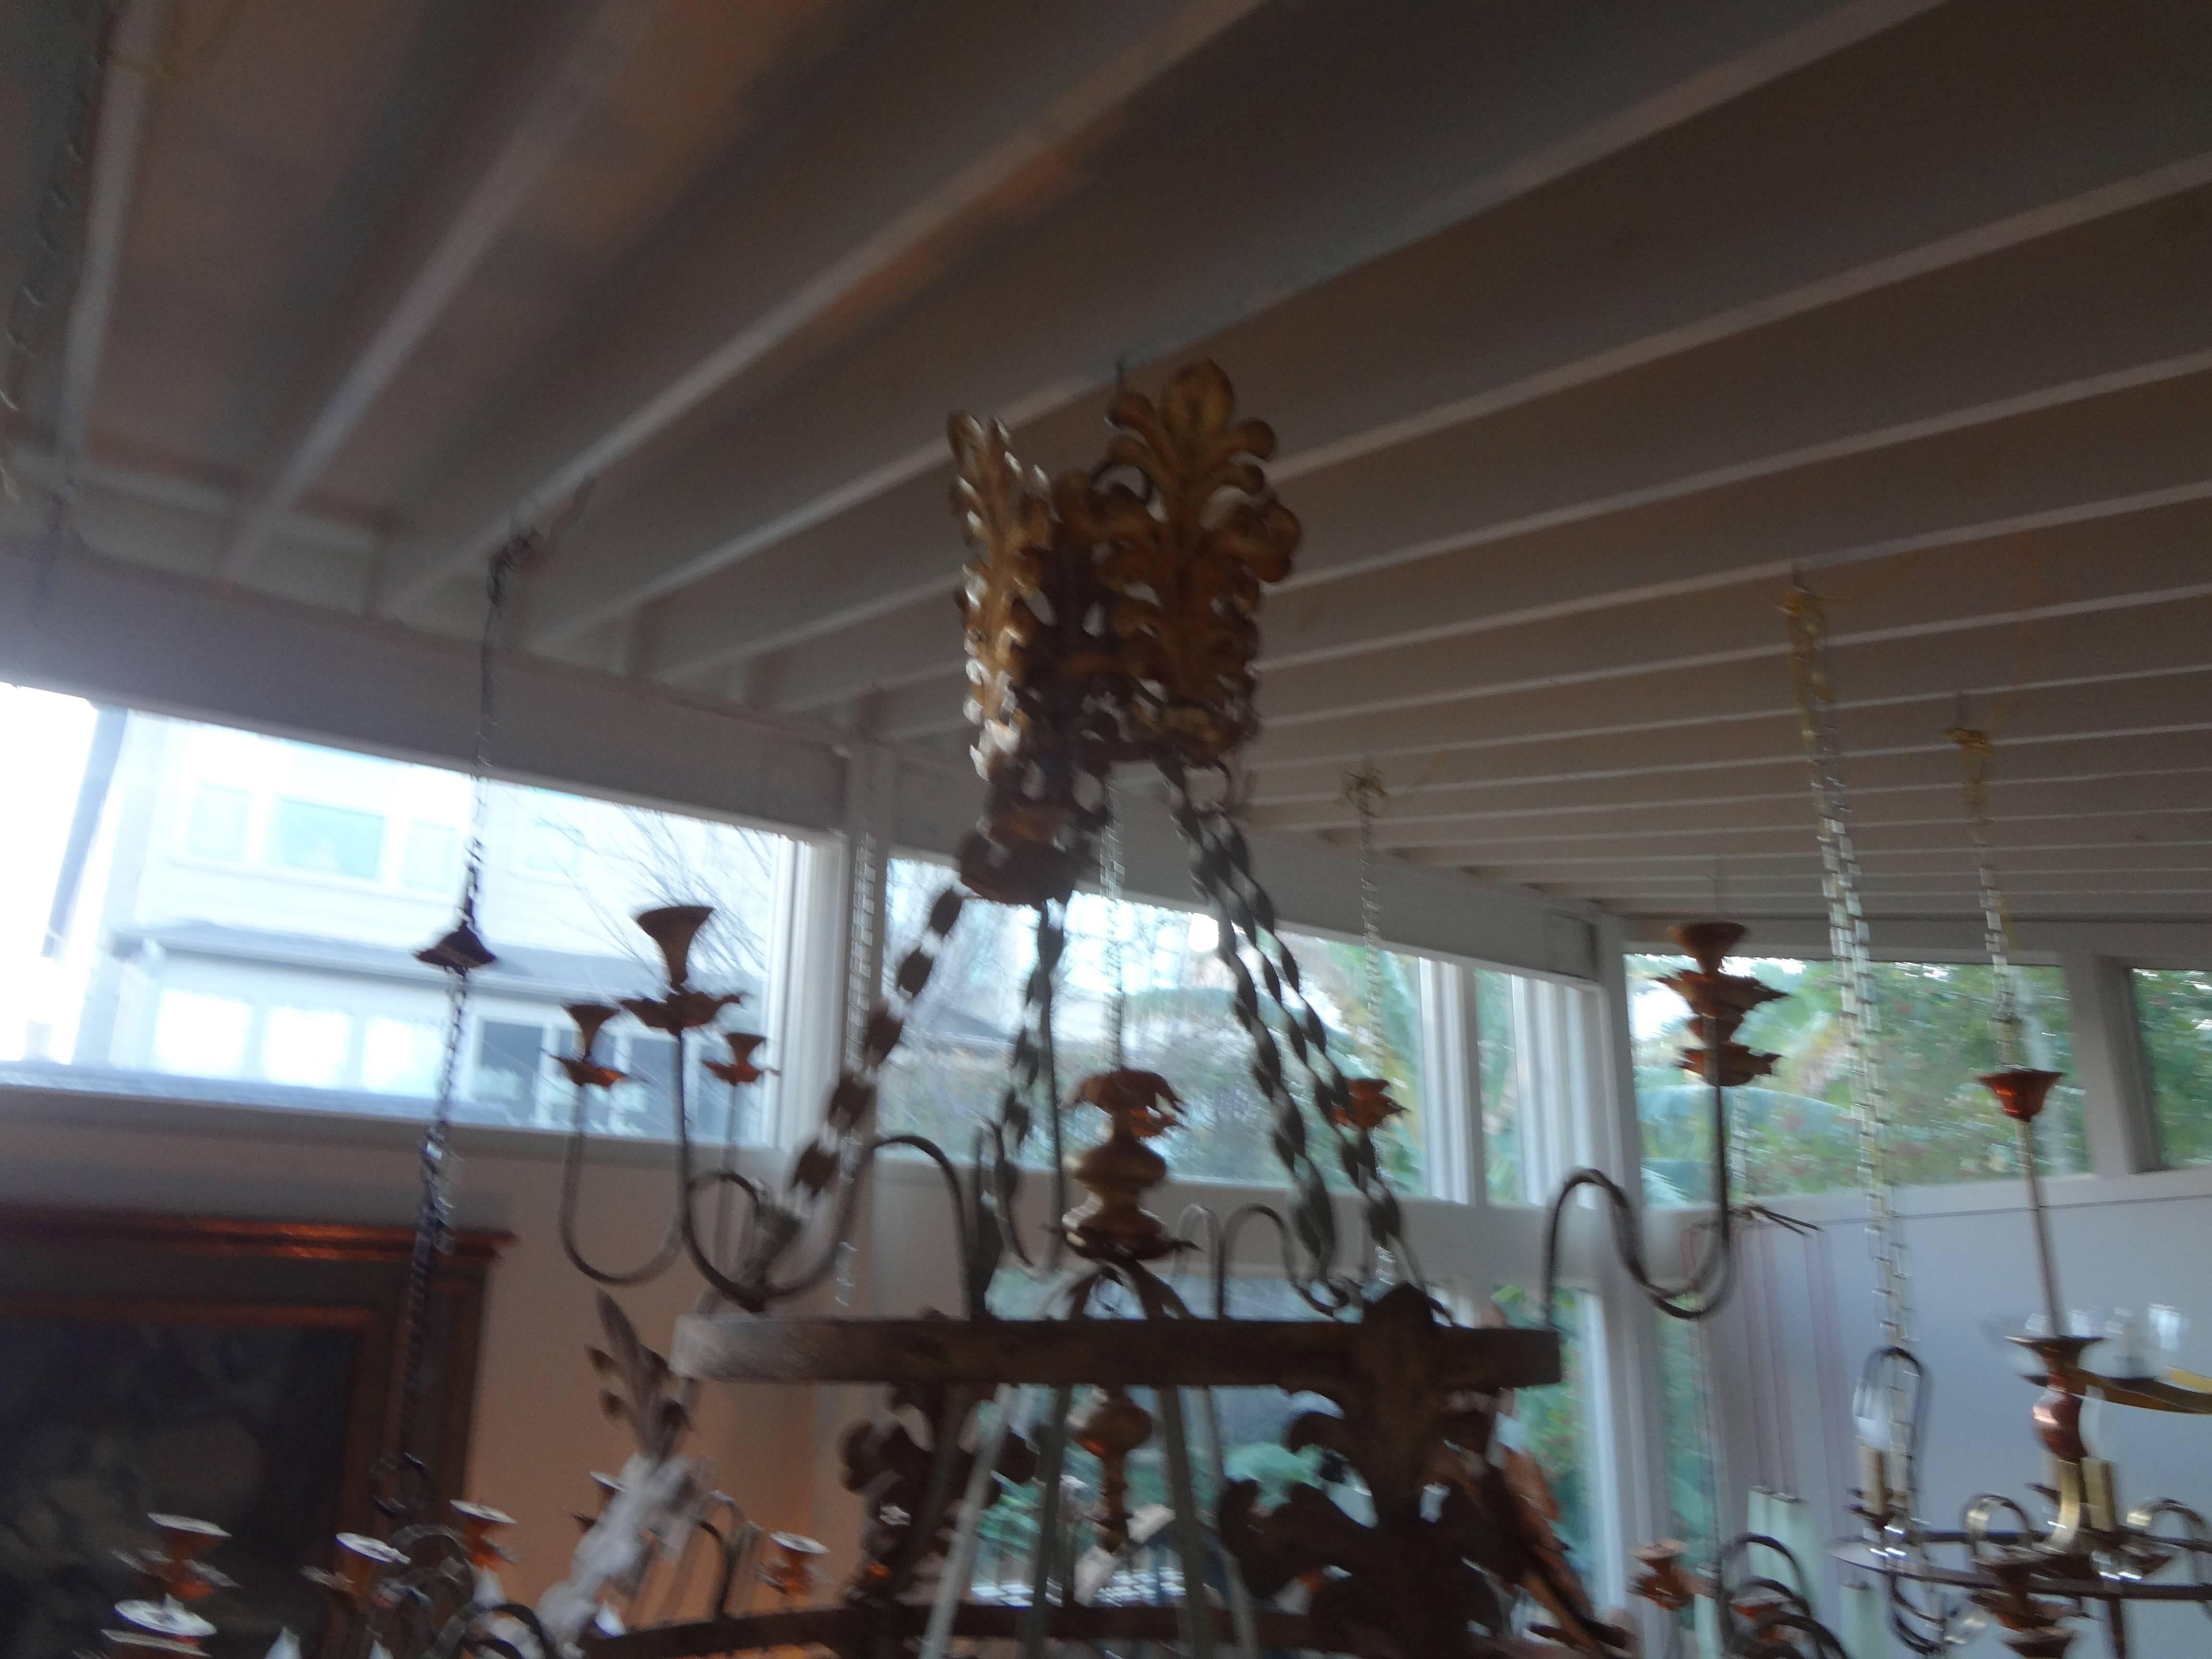 Monumental Italian Wrought Iron, Thirty-Two-Light Chandelier 72